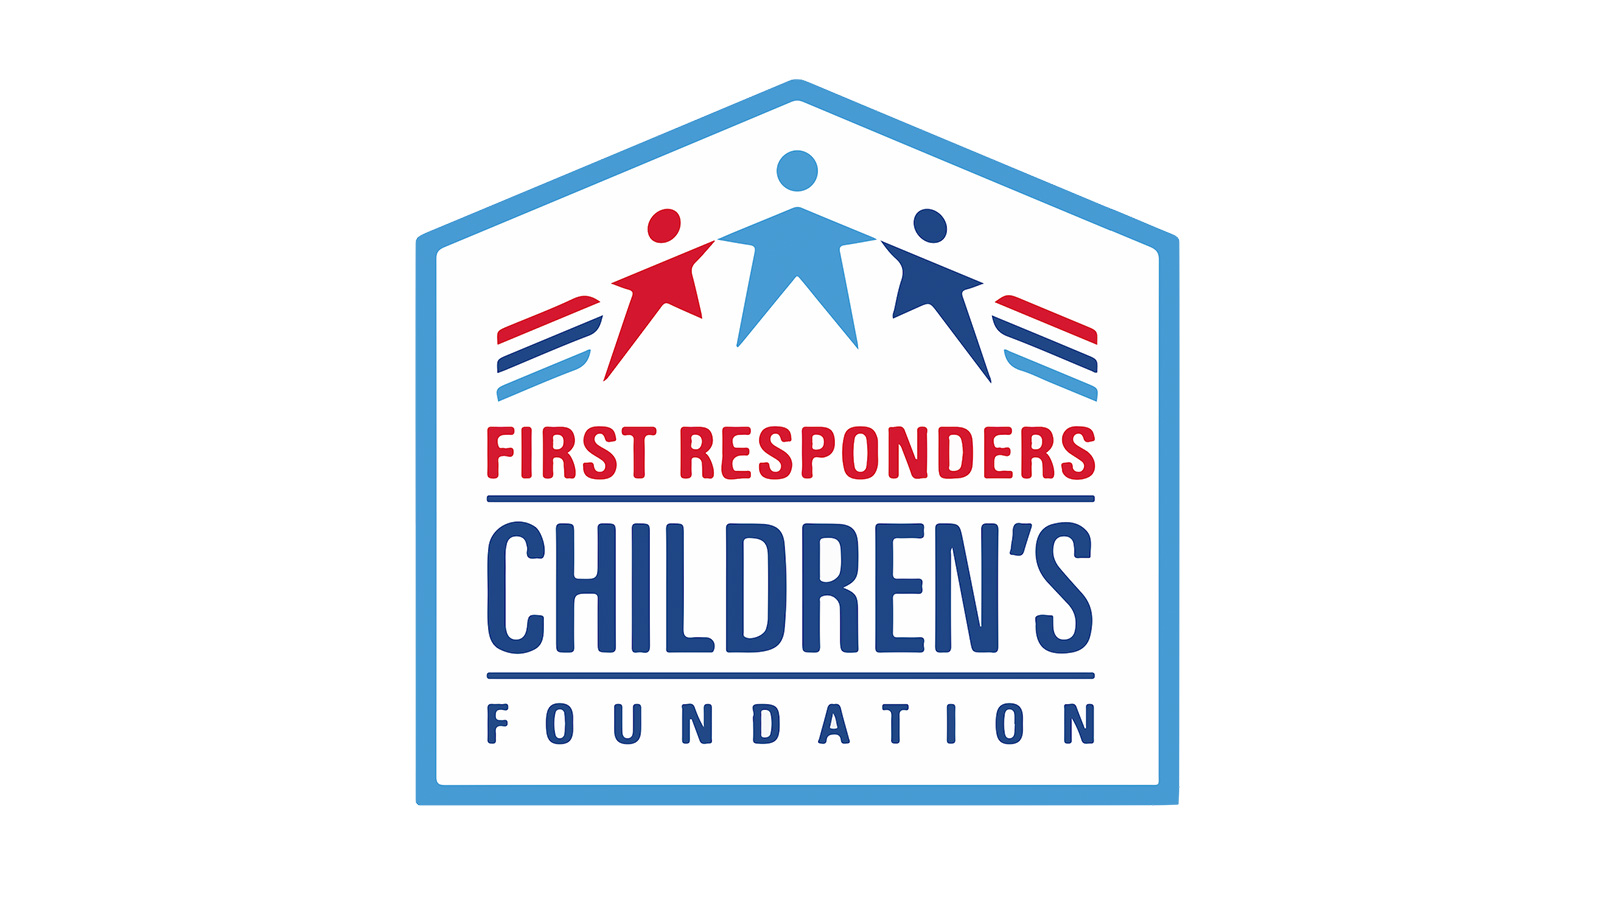 FRCF Appeals to First Responders to Apply to the Foundation’s Free Programs,  Grants and Scholarships